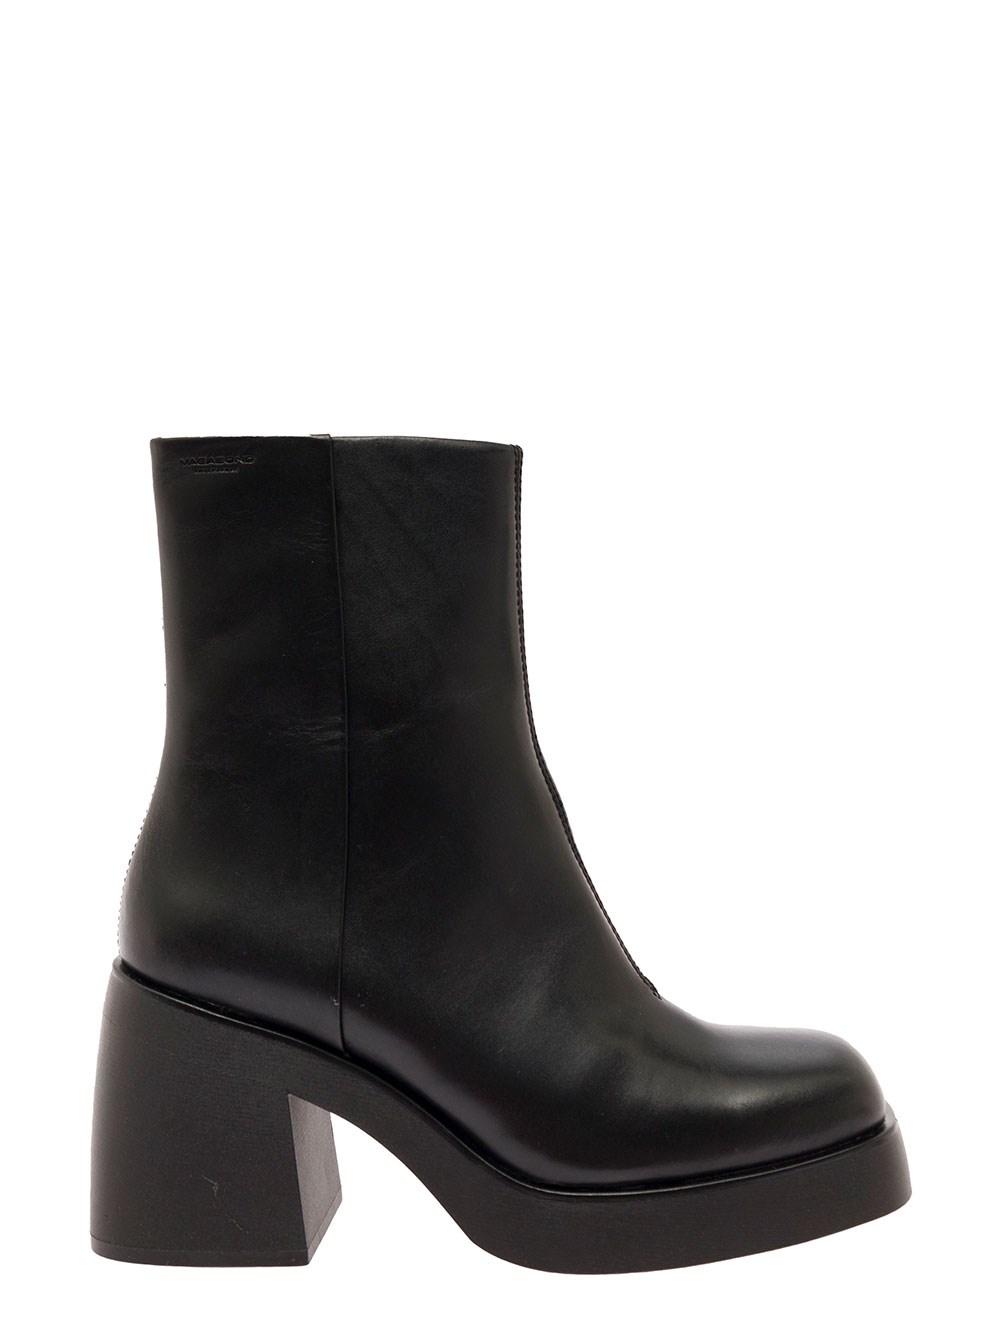 Vagabond Shoemakers 'brooke' Leather Boots Chunky Heel Woman in Black | Lyst